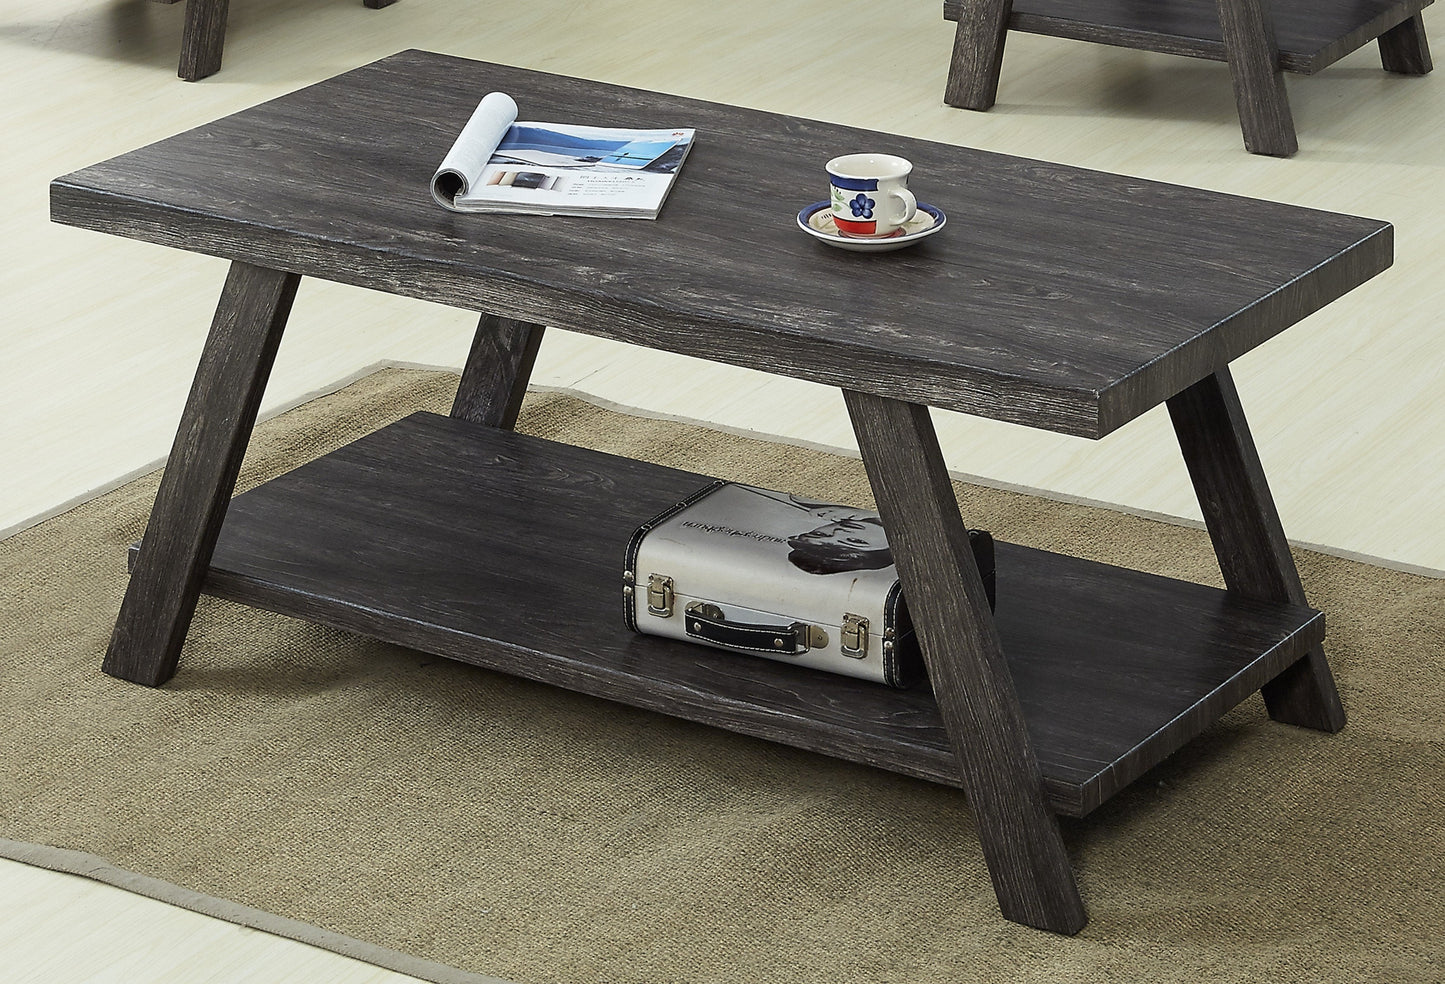 Athens Contemporary Replicated Wood Shelf Coffee Set Table in Charcoal Finish